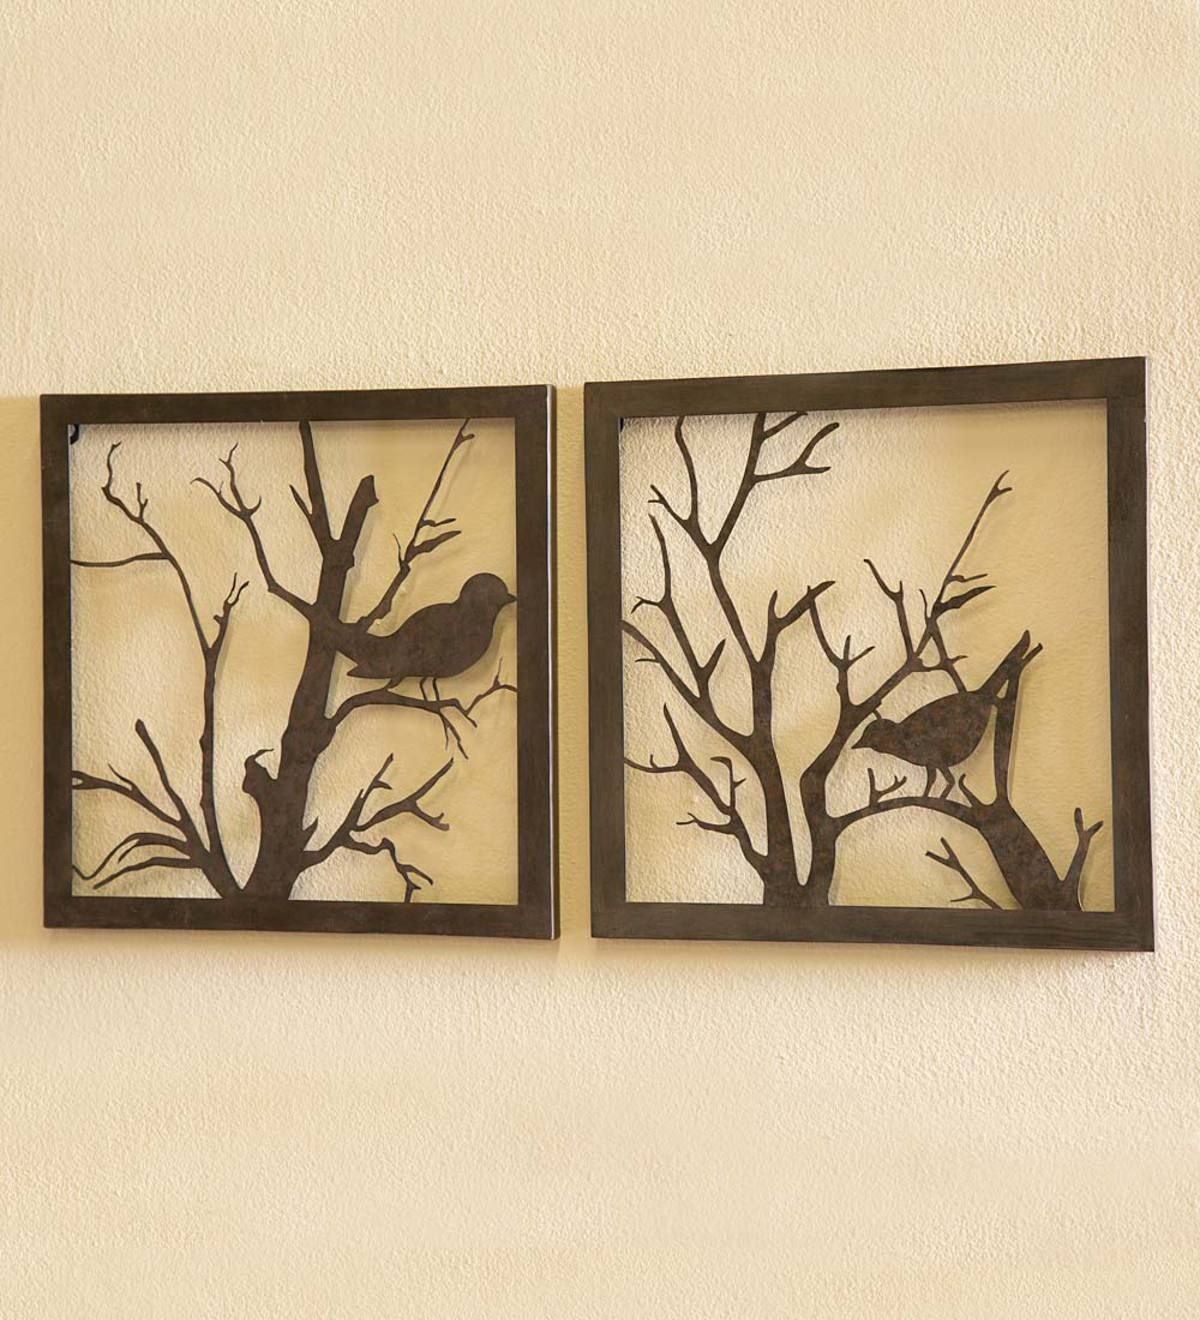 Metal Bird Wall Art, Set Of 2 | Plowhearth With Regard To Most Up To Date Metal Bird Wall Art (Gallery 10 of 20)